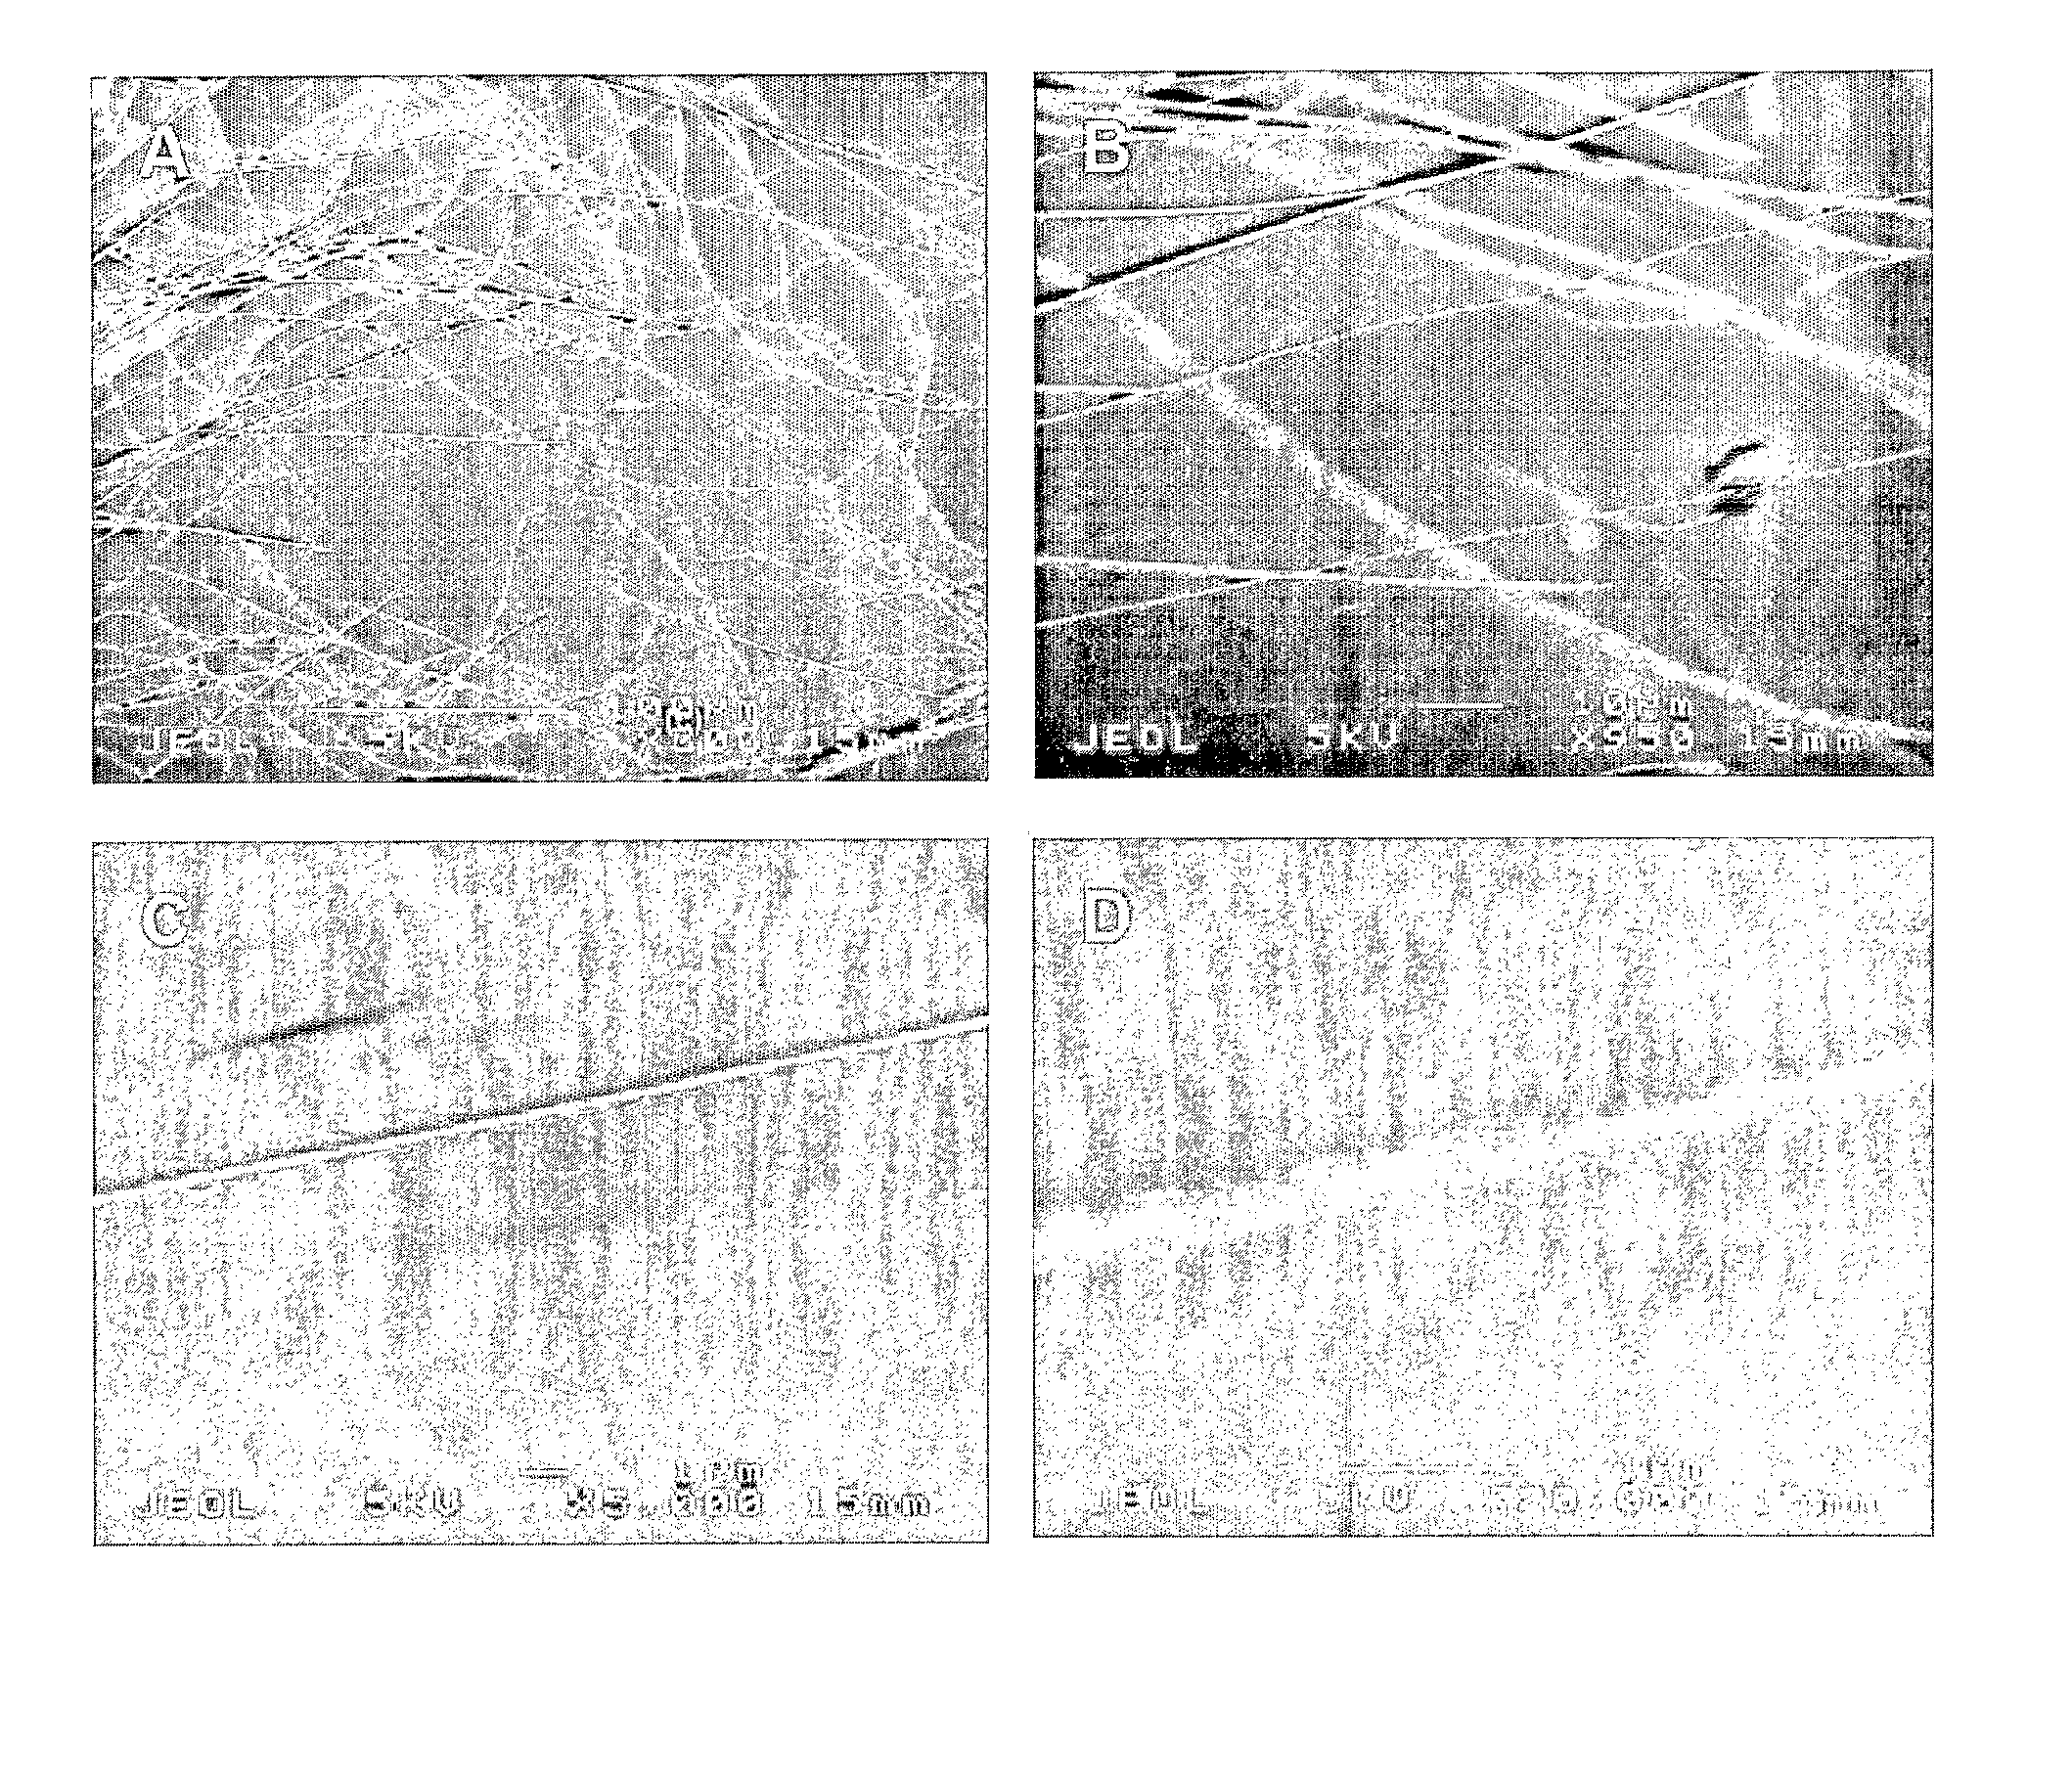 Peptide Nanostructures Containing End-Capping Modified Peptides And Methods Of Generating And Using The Same